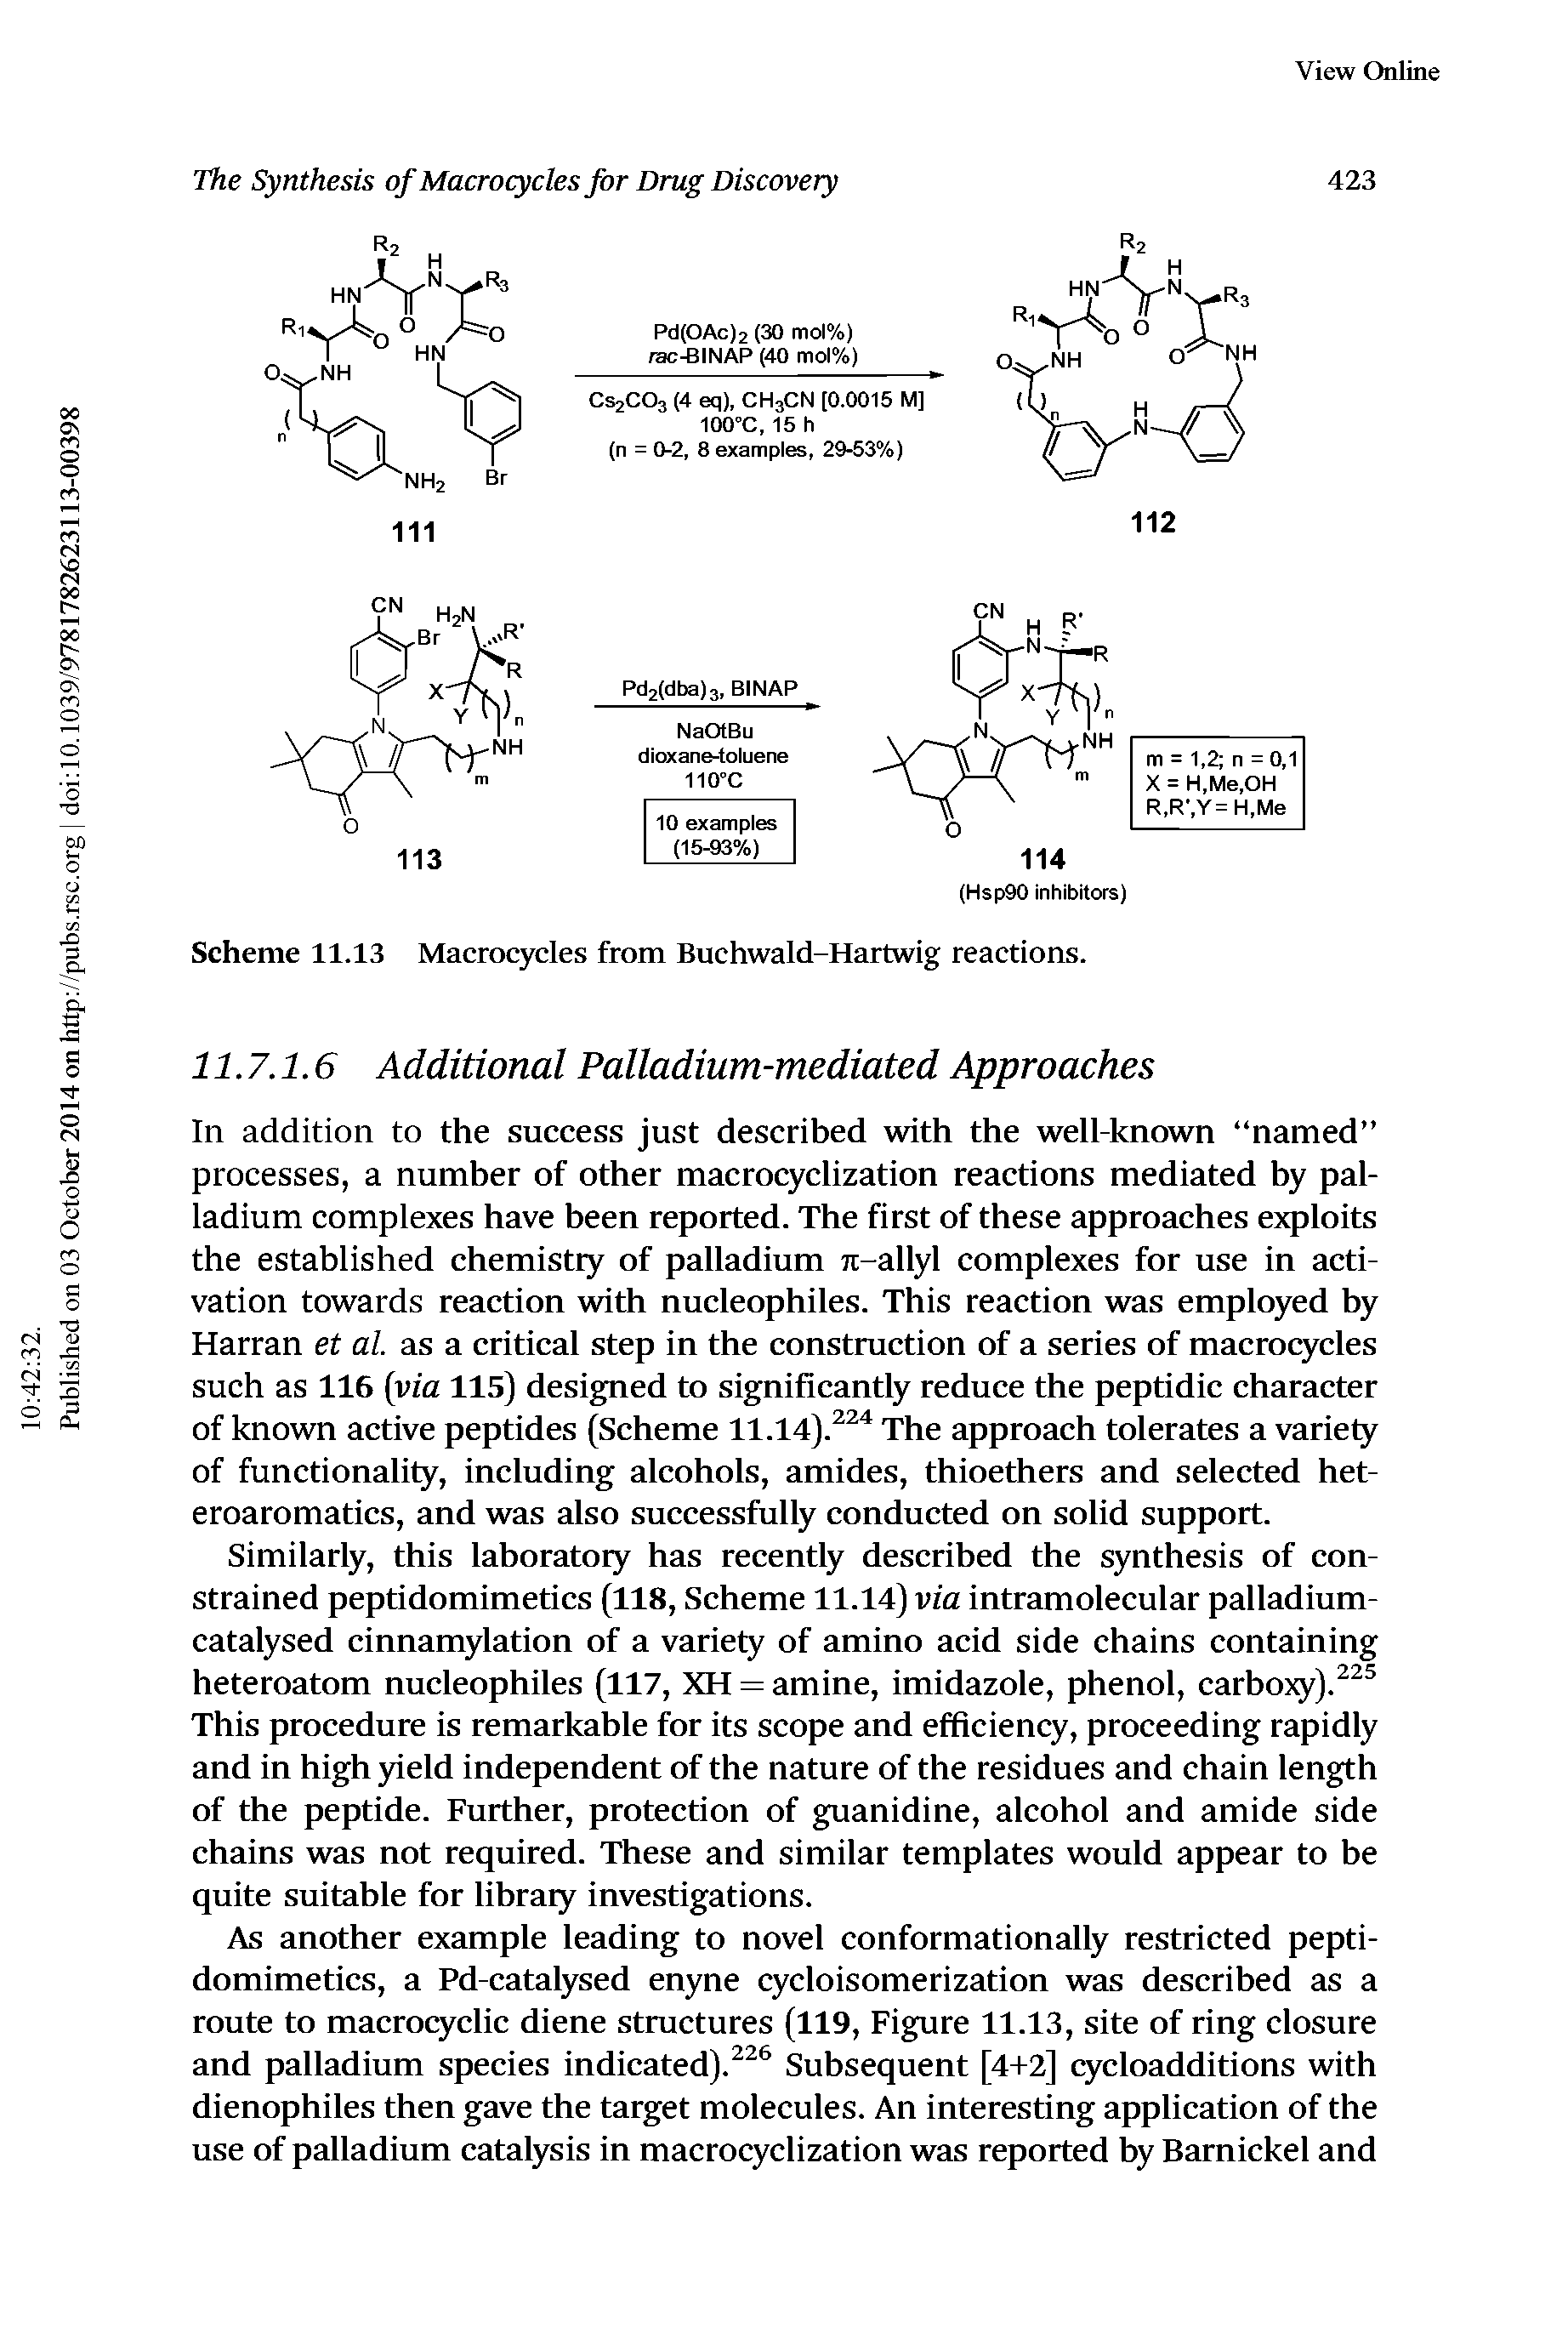 Scheme 11.13 Macrocycles from Buchwald-Hartwig reactions.